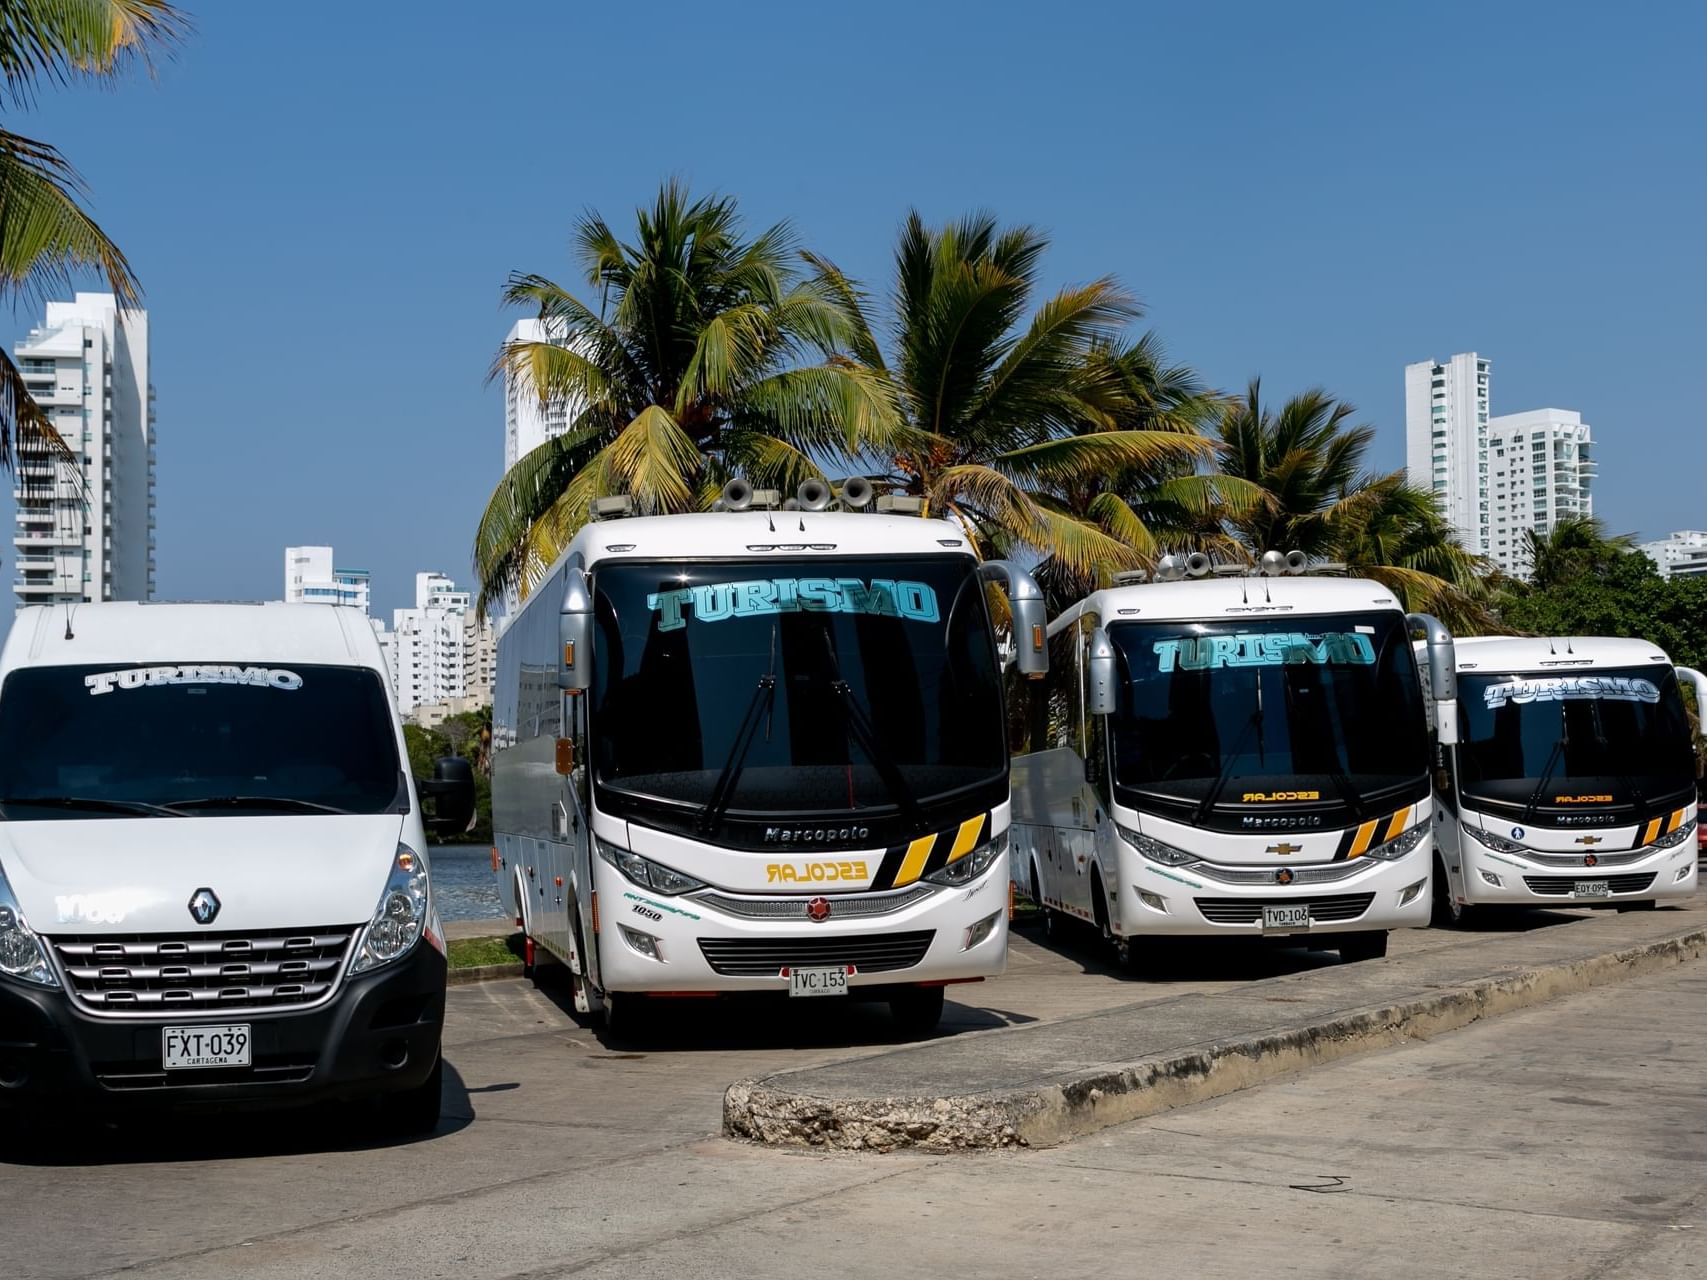 Several tour buses lined up in parking slot at Hotel Isla Del Encanto